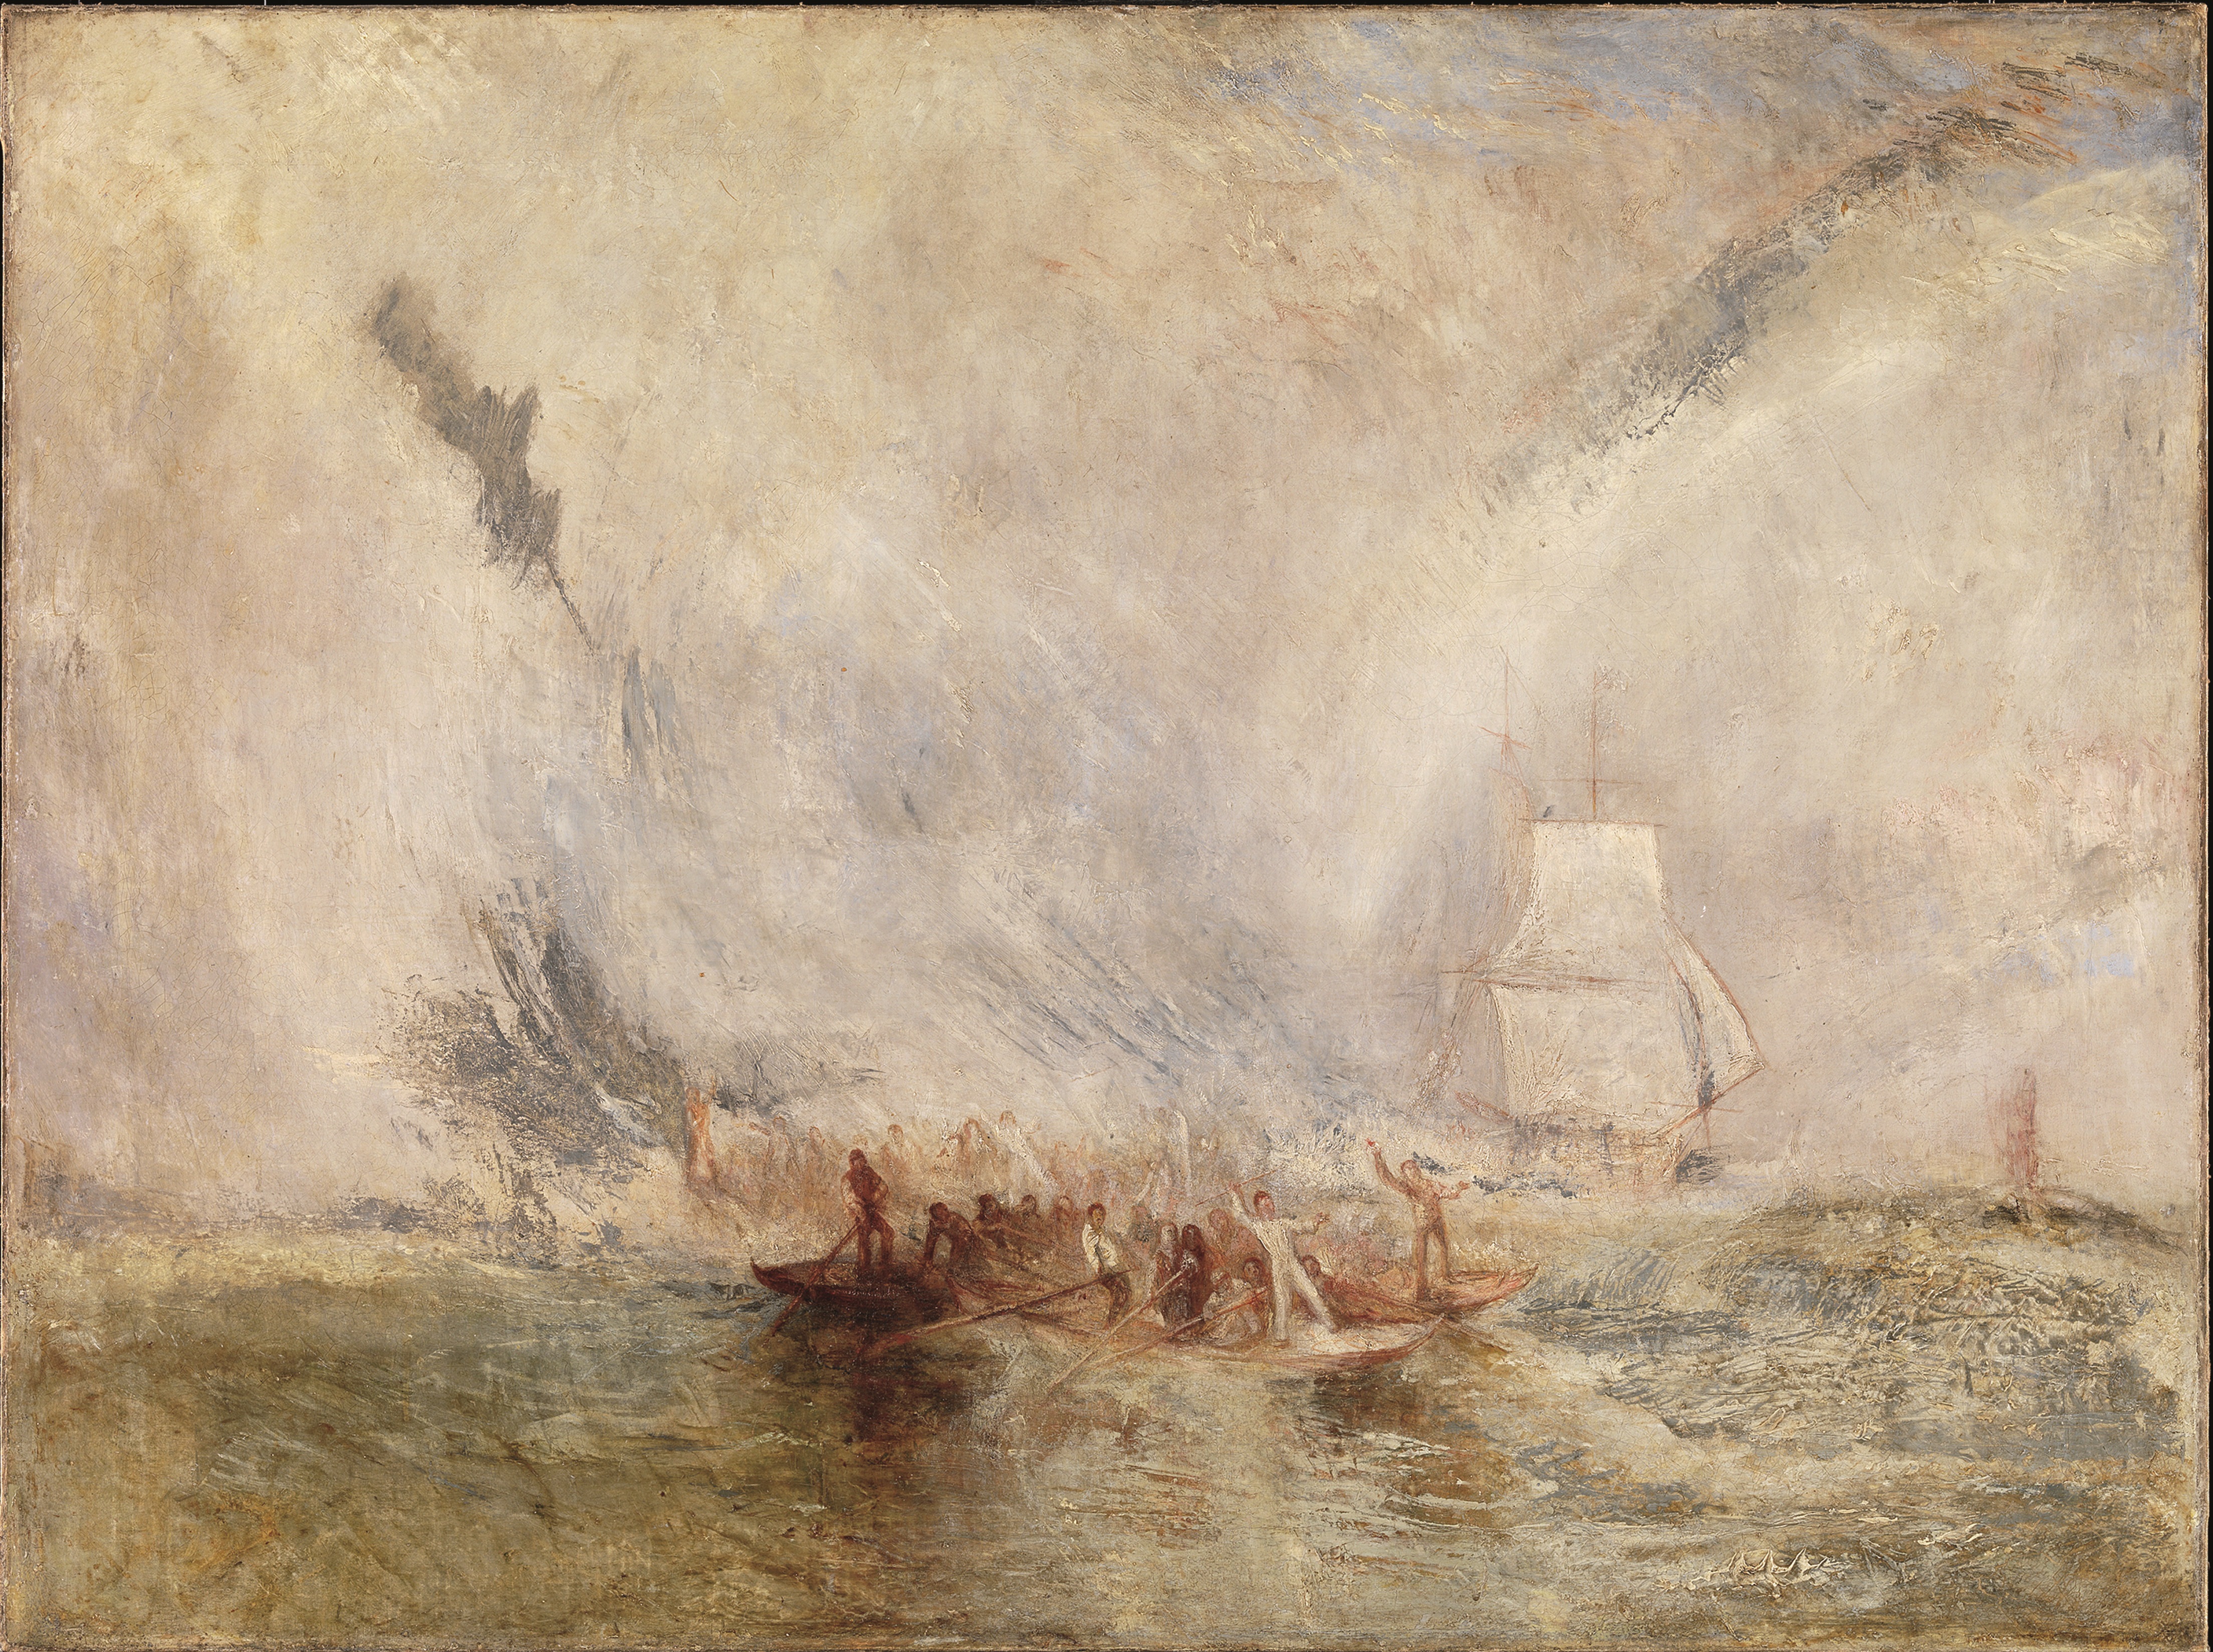 "Whalers," oil on canvas, 1845 (Courtesy of The Met)